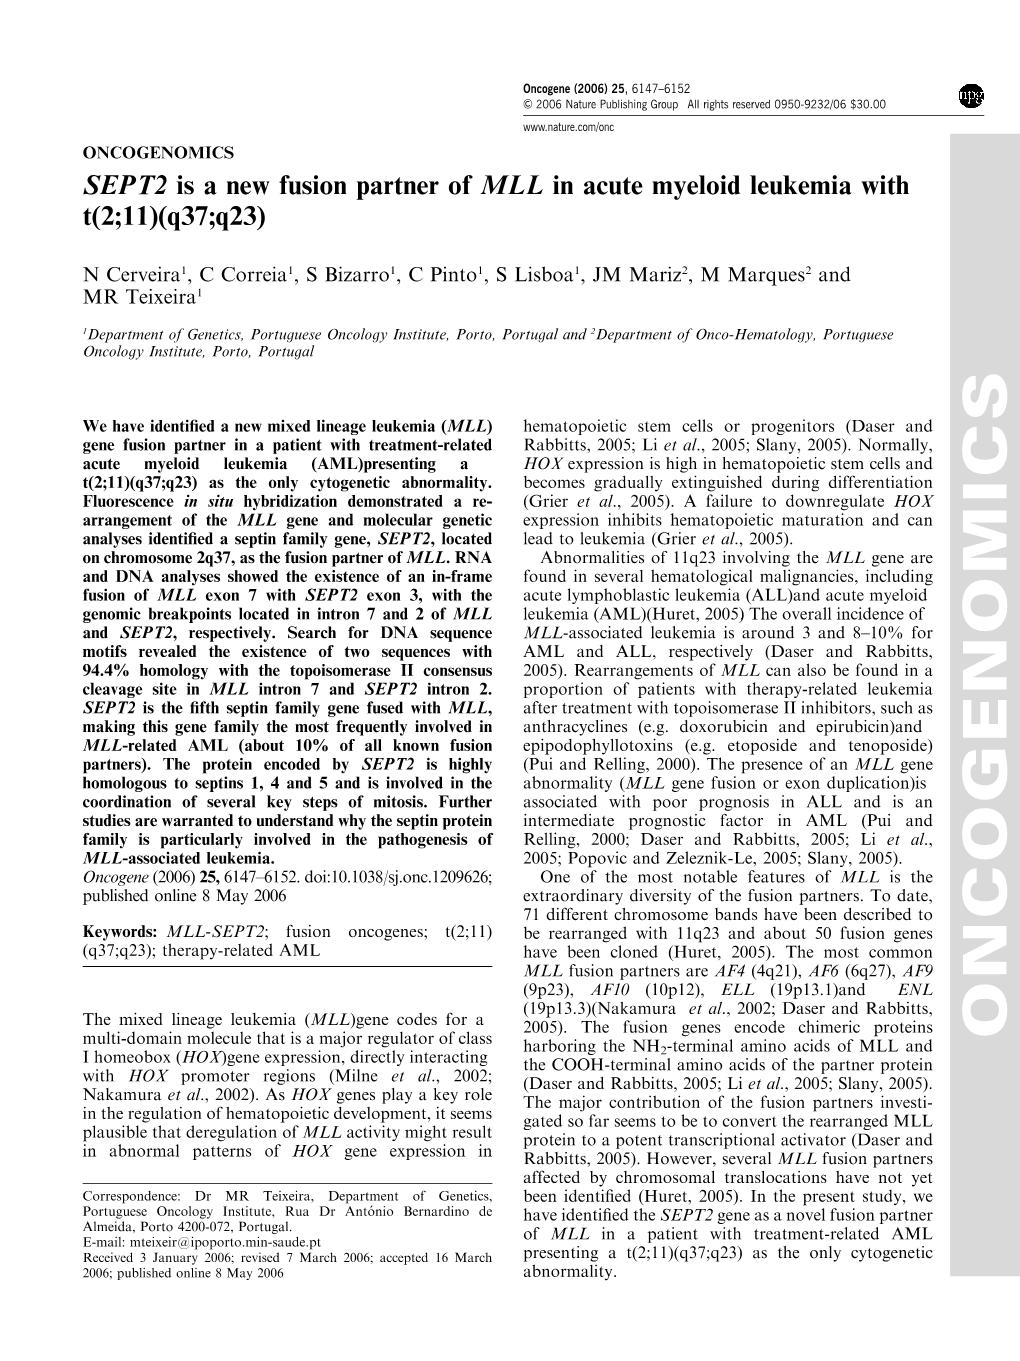 SEPT2 Is a New Fusion Partner of MLL in Acute Myeloid Leukemia with T (2